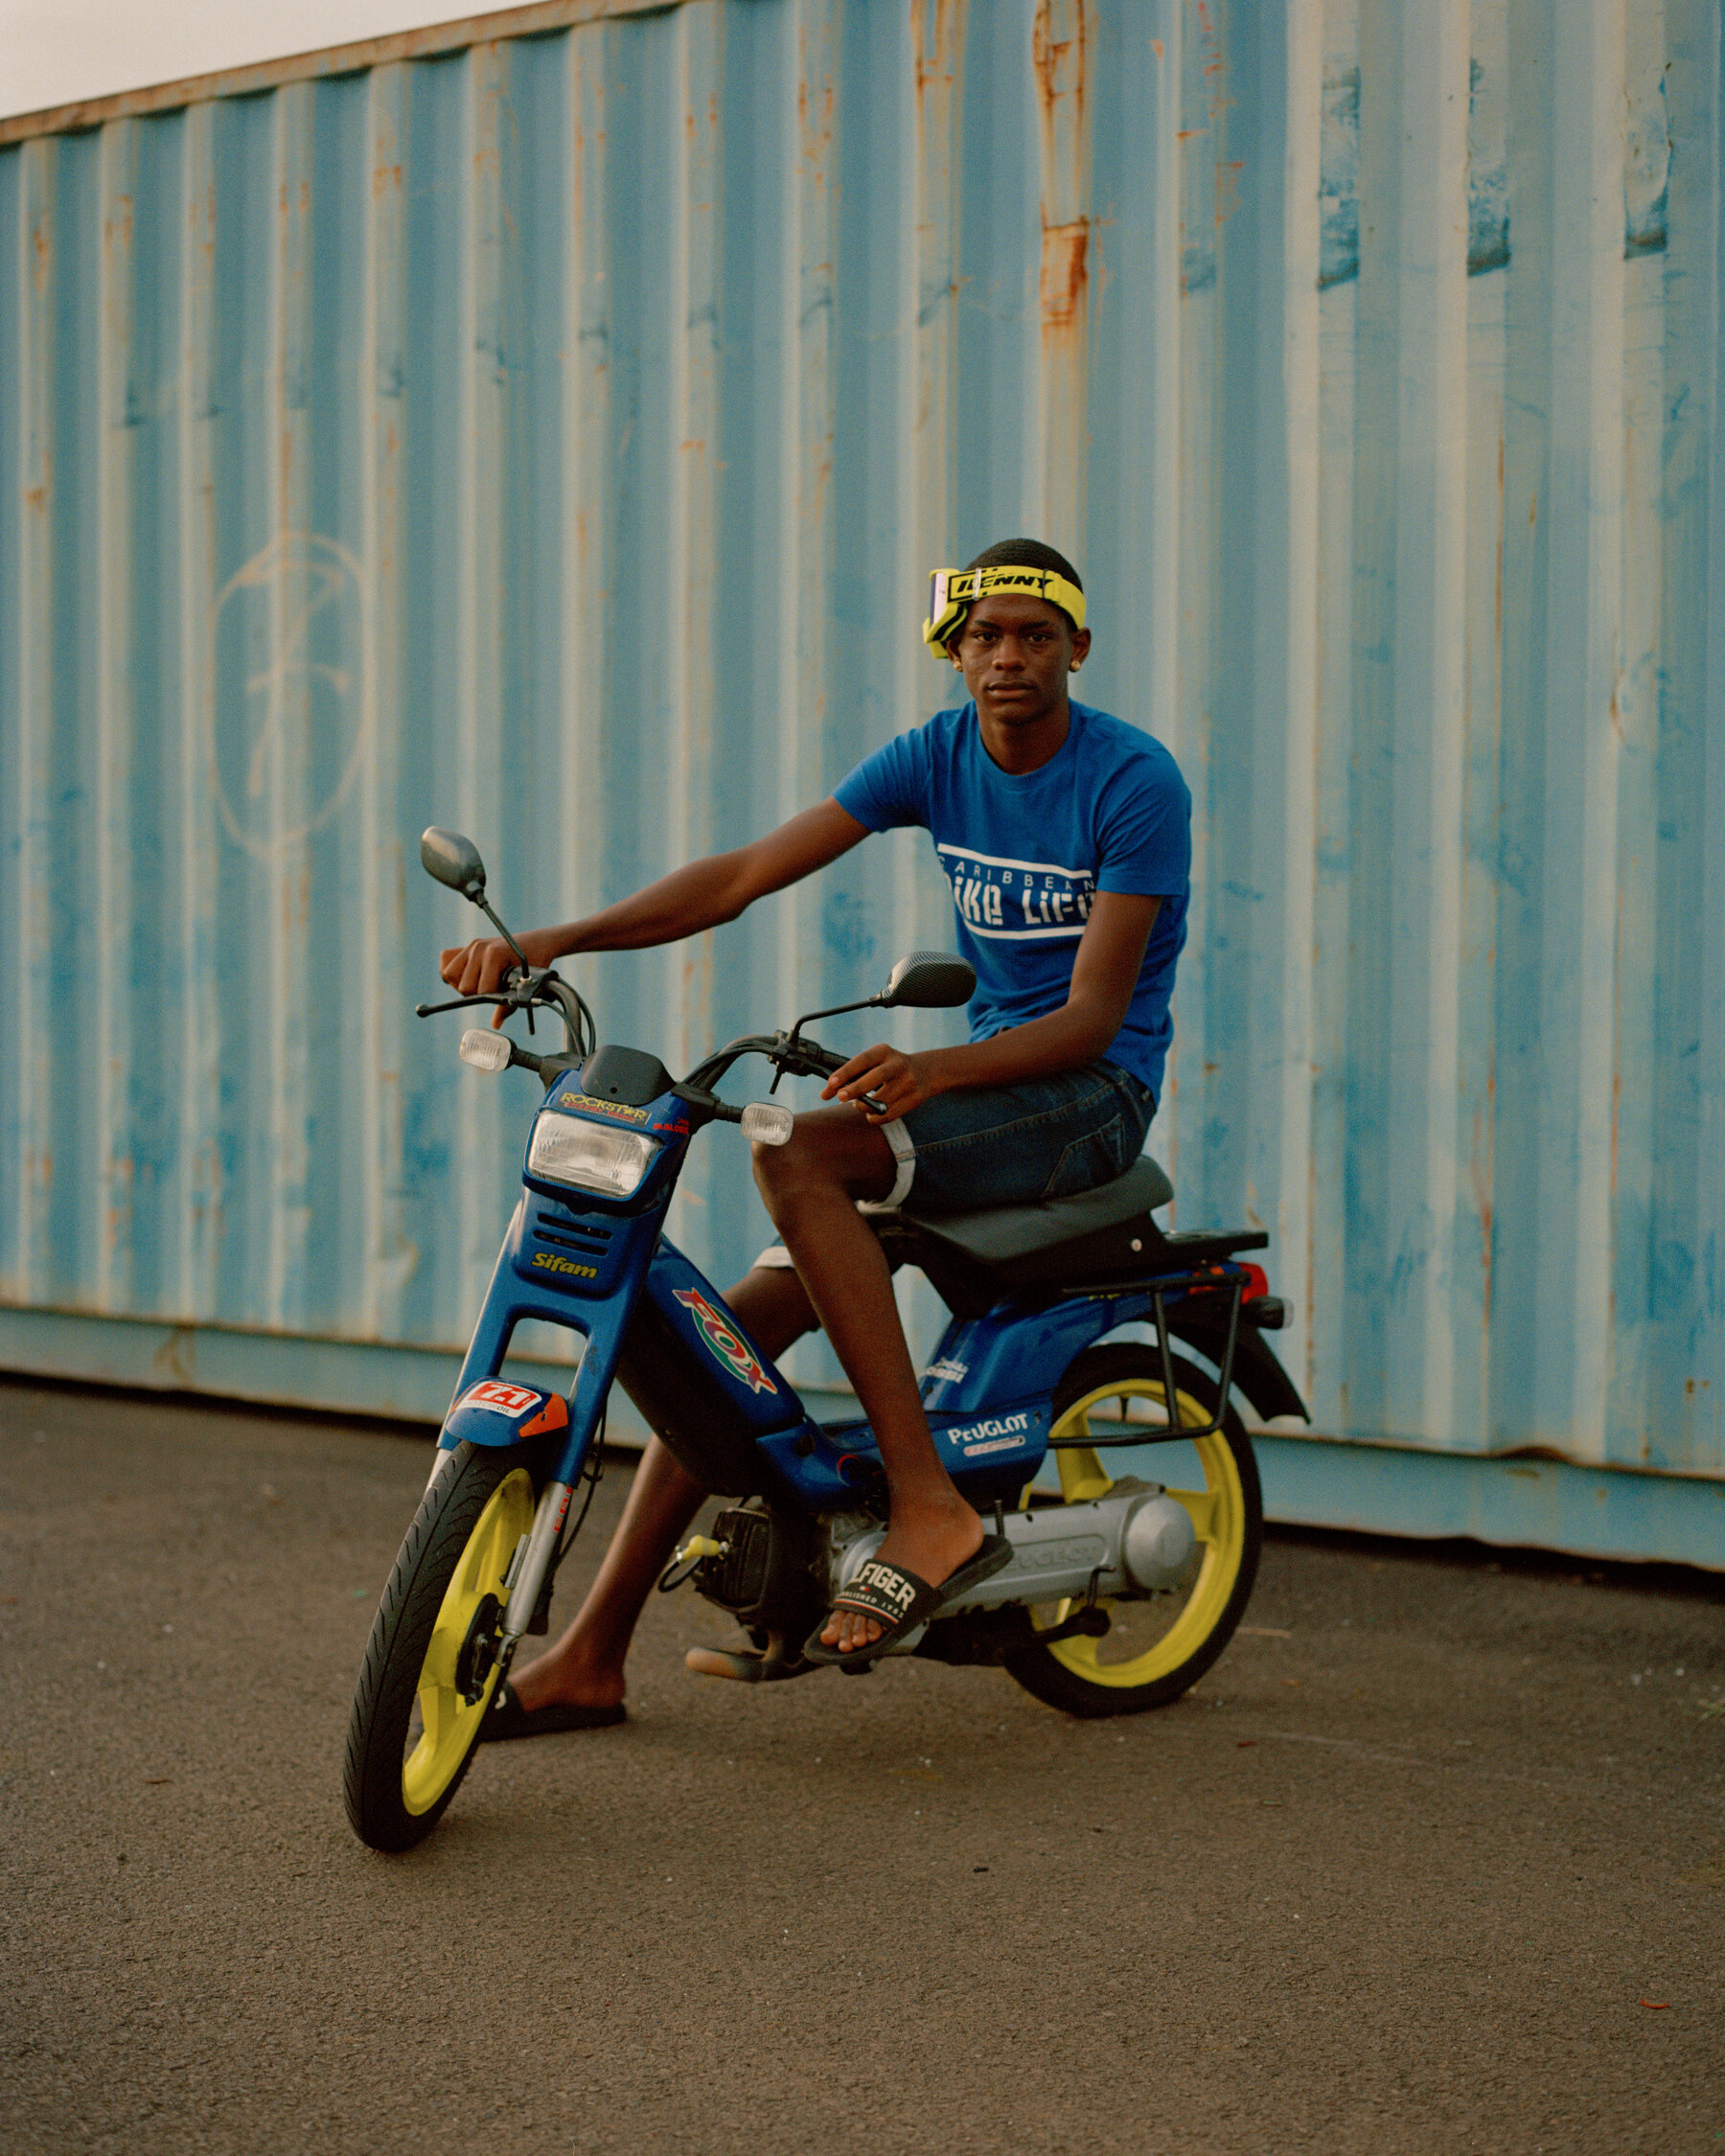 A young man sitting on a blue motorbike with yellow spokes. He wears a blue T-shirt that says 